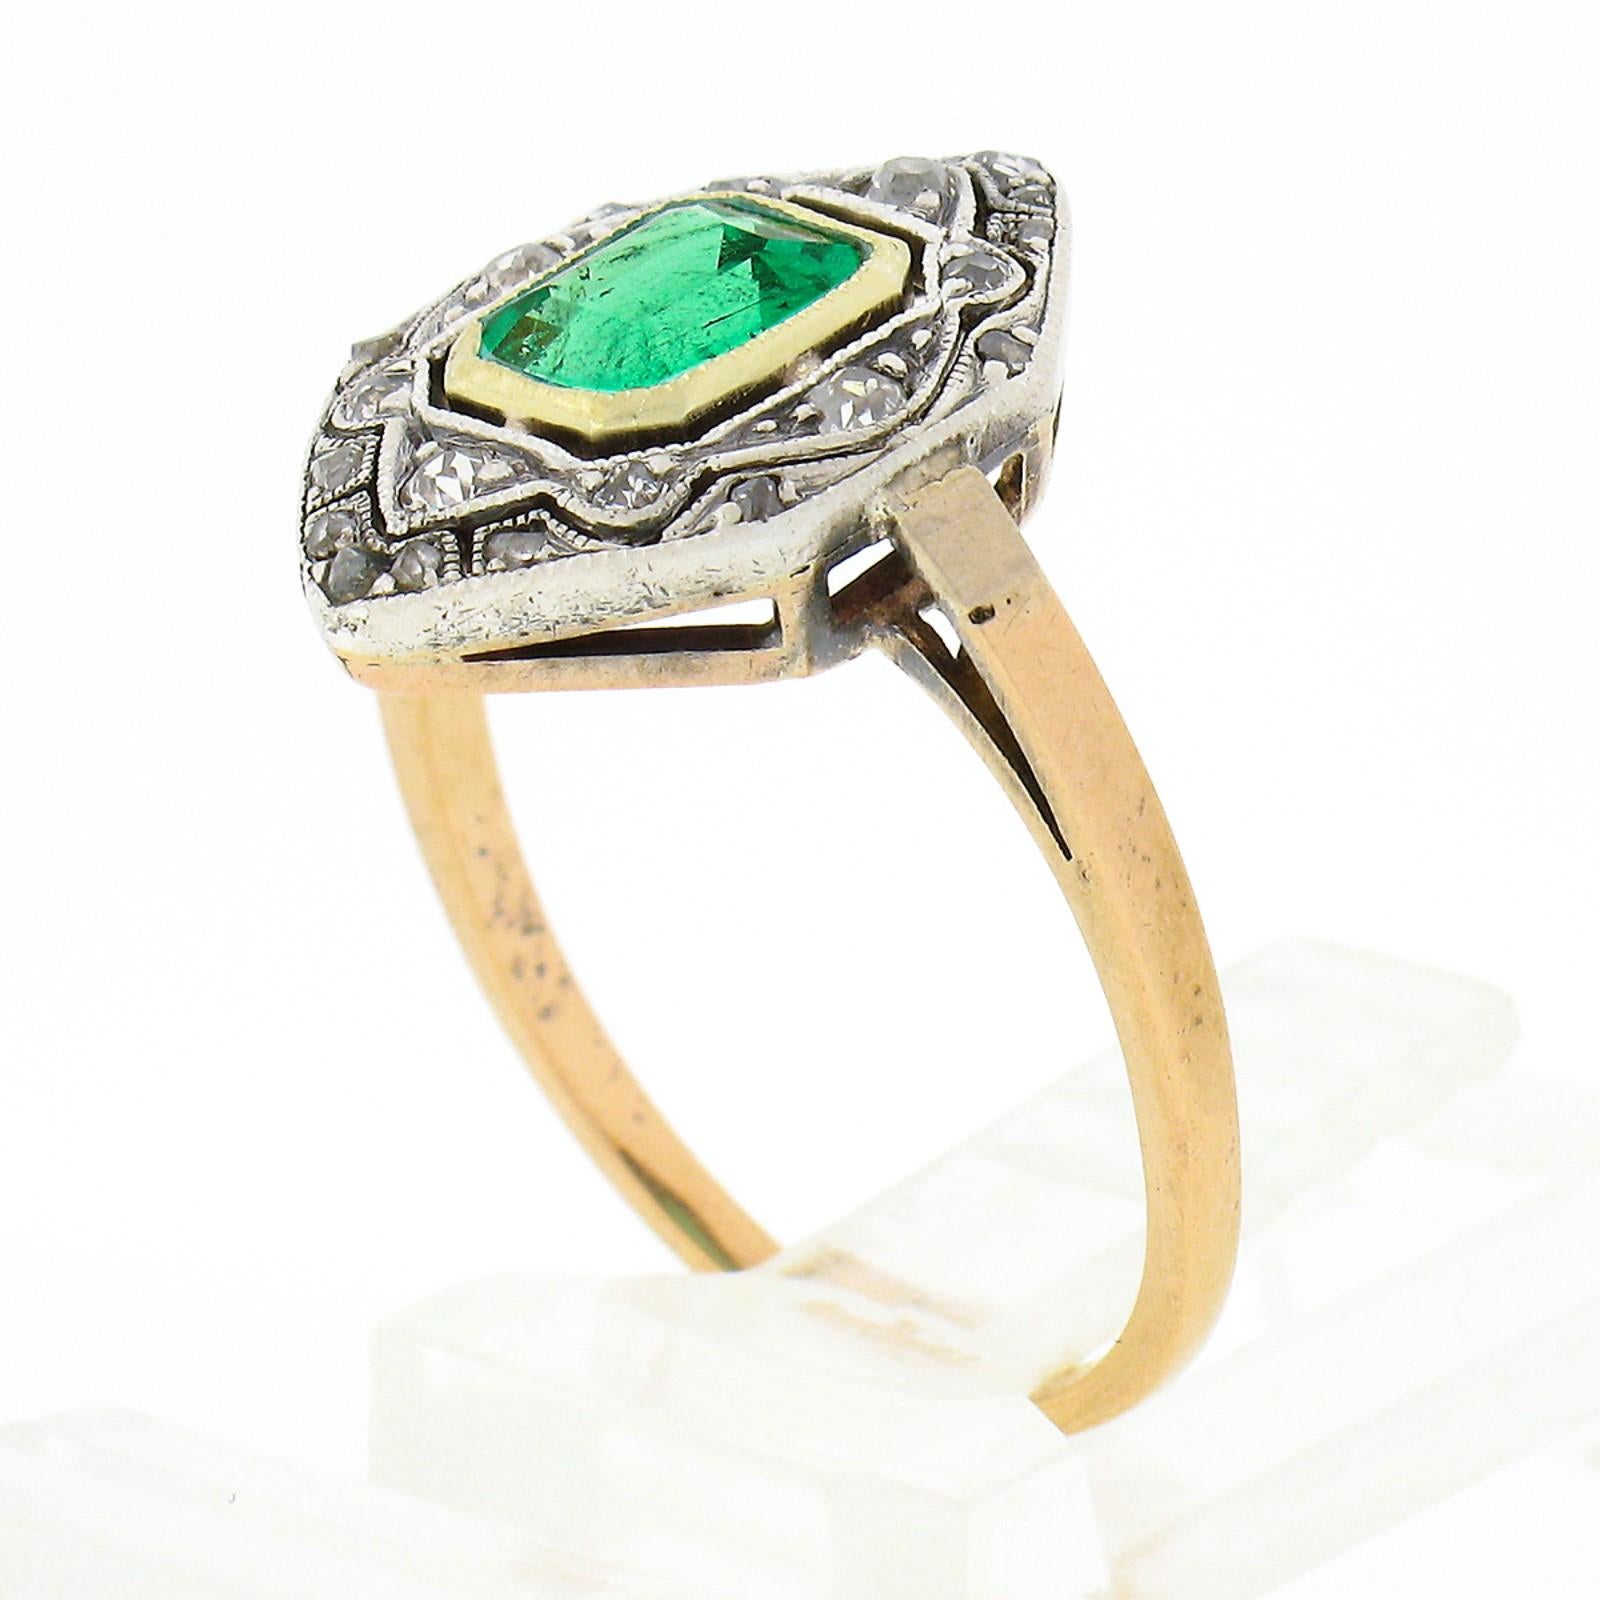 Antique Edwardian 14k Gold Silver Emerald Solitaire w/ Pave Diamond Platter Ring 2